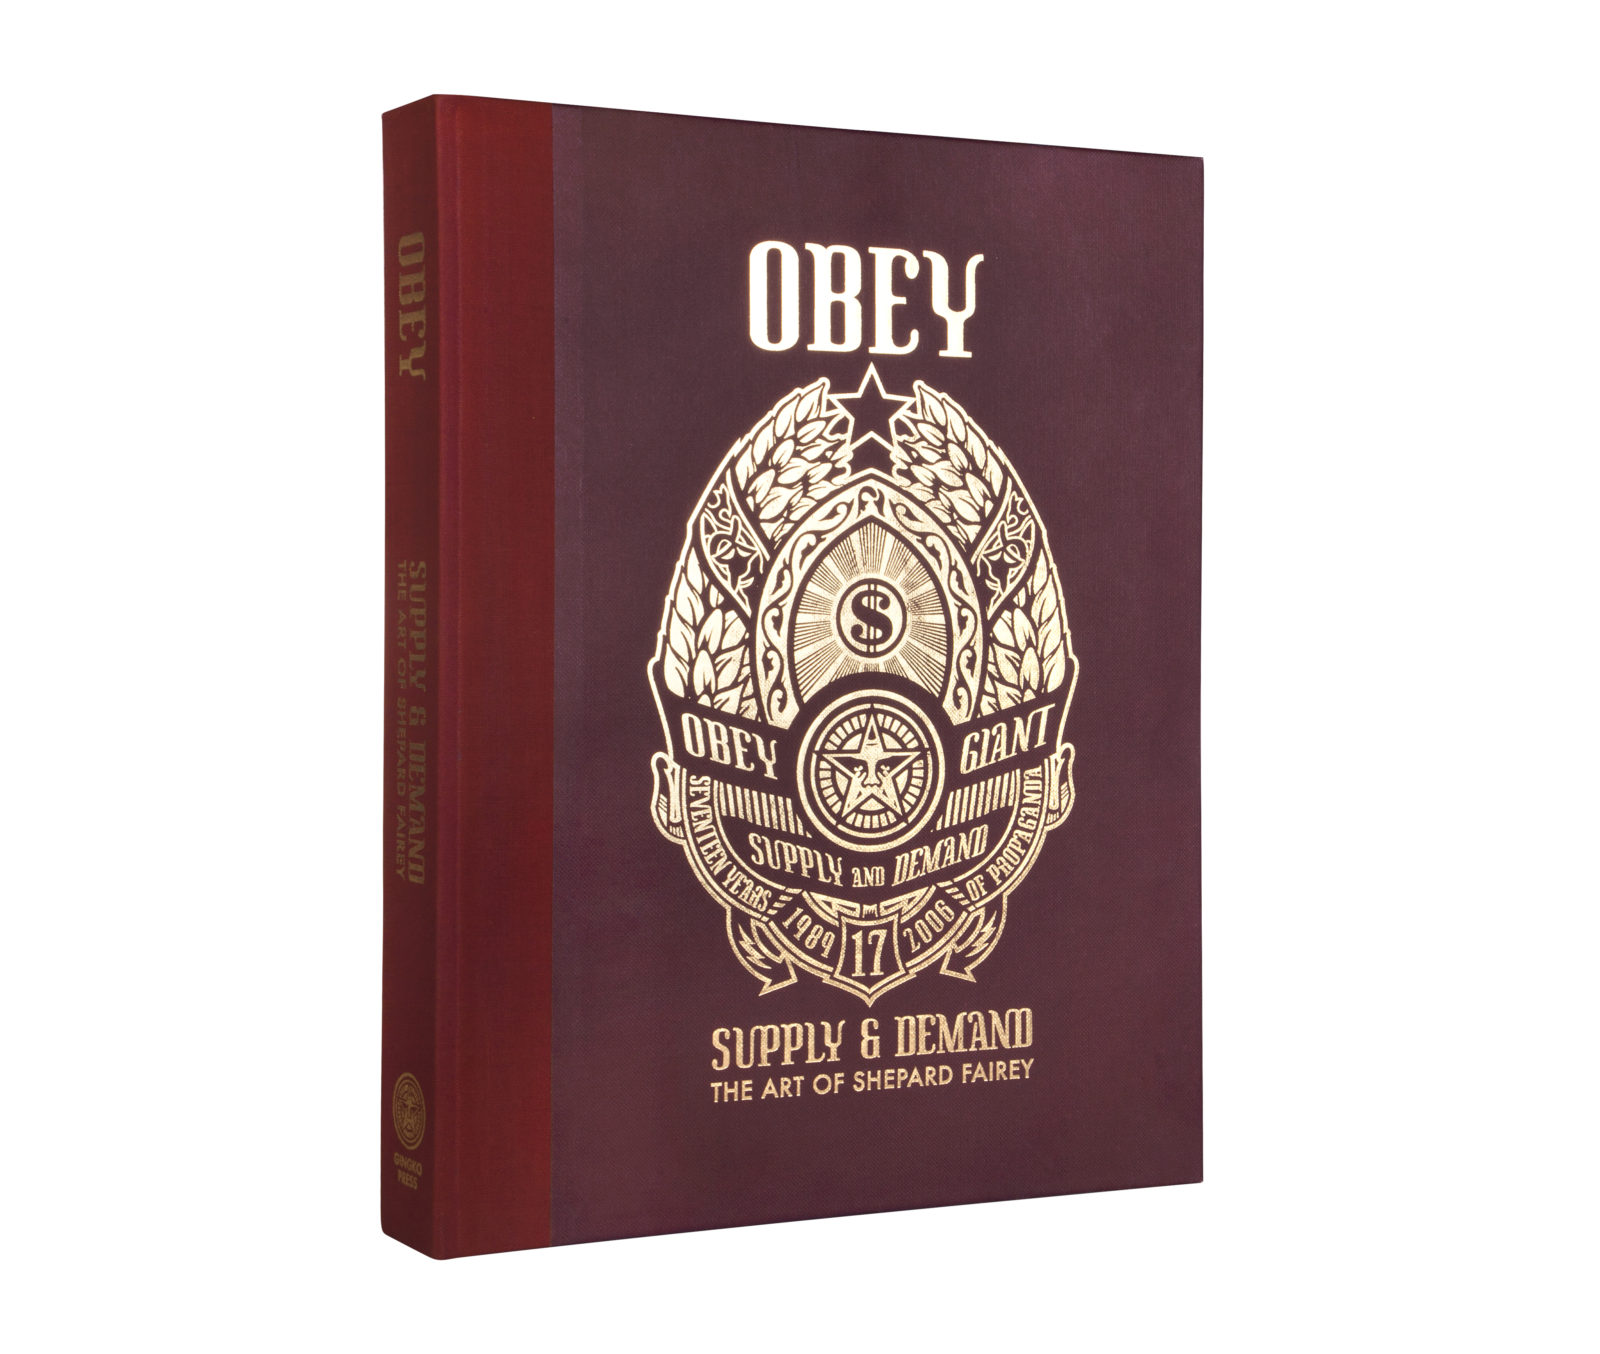 SUPPLY AND DEMAND: THE ART OF SHEPARD FAIREY (ORIGINAL EDITION